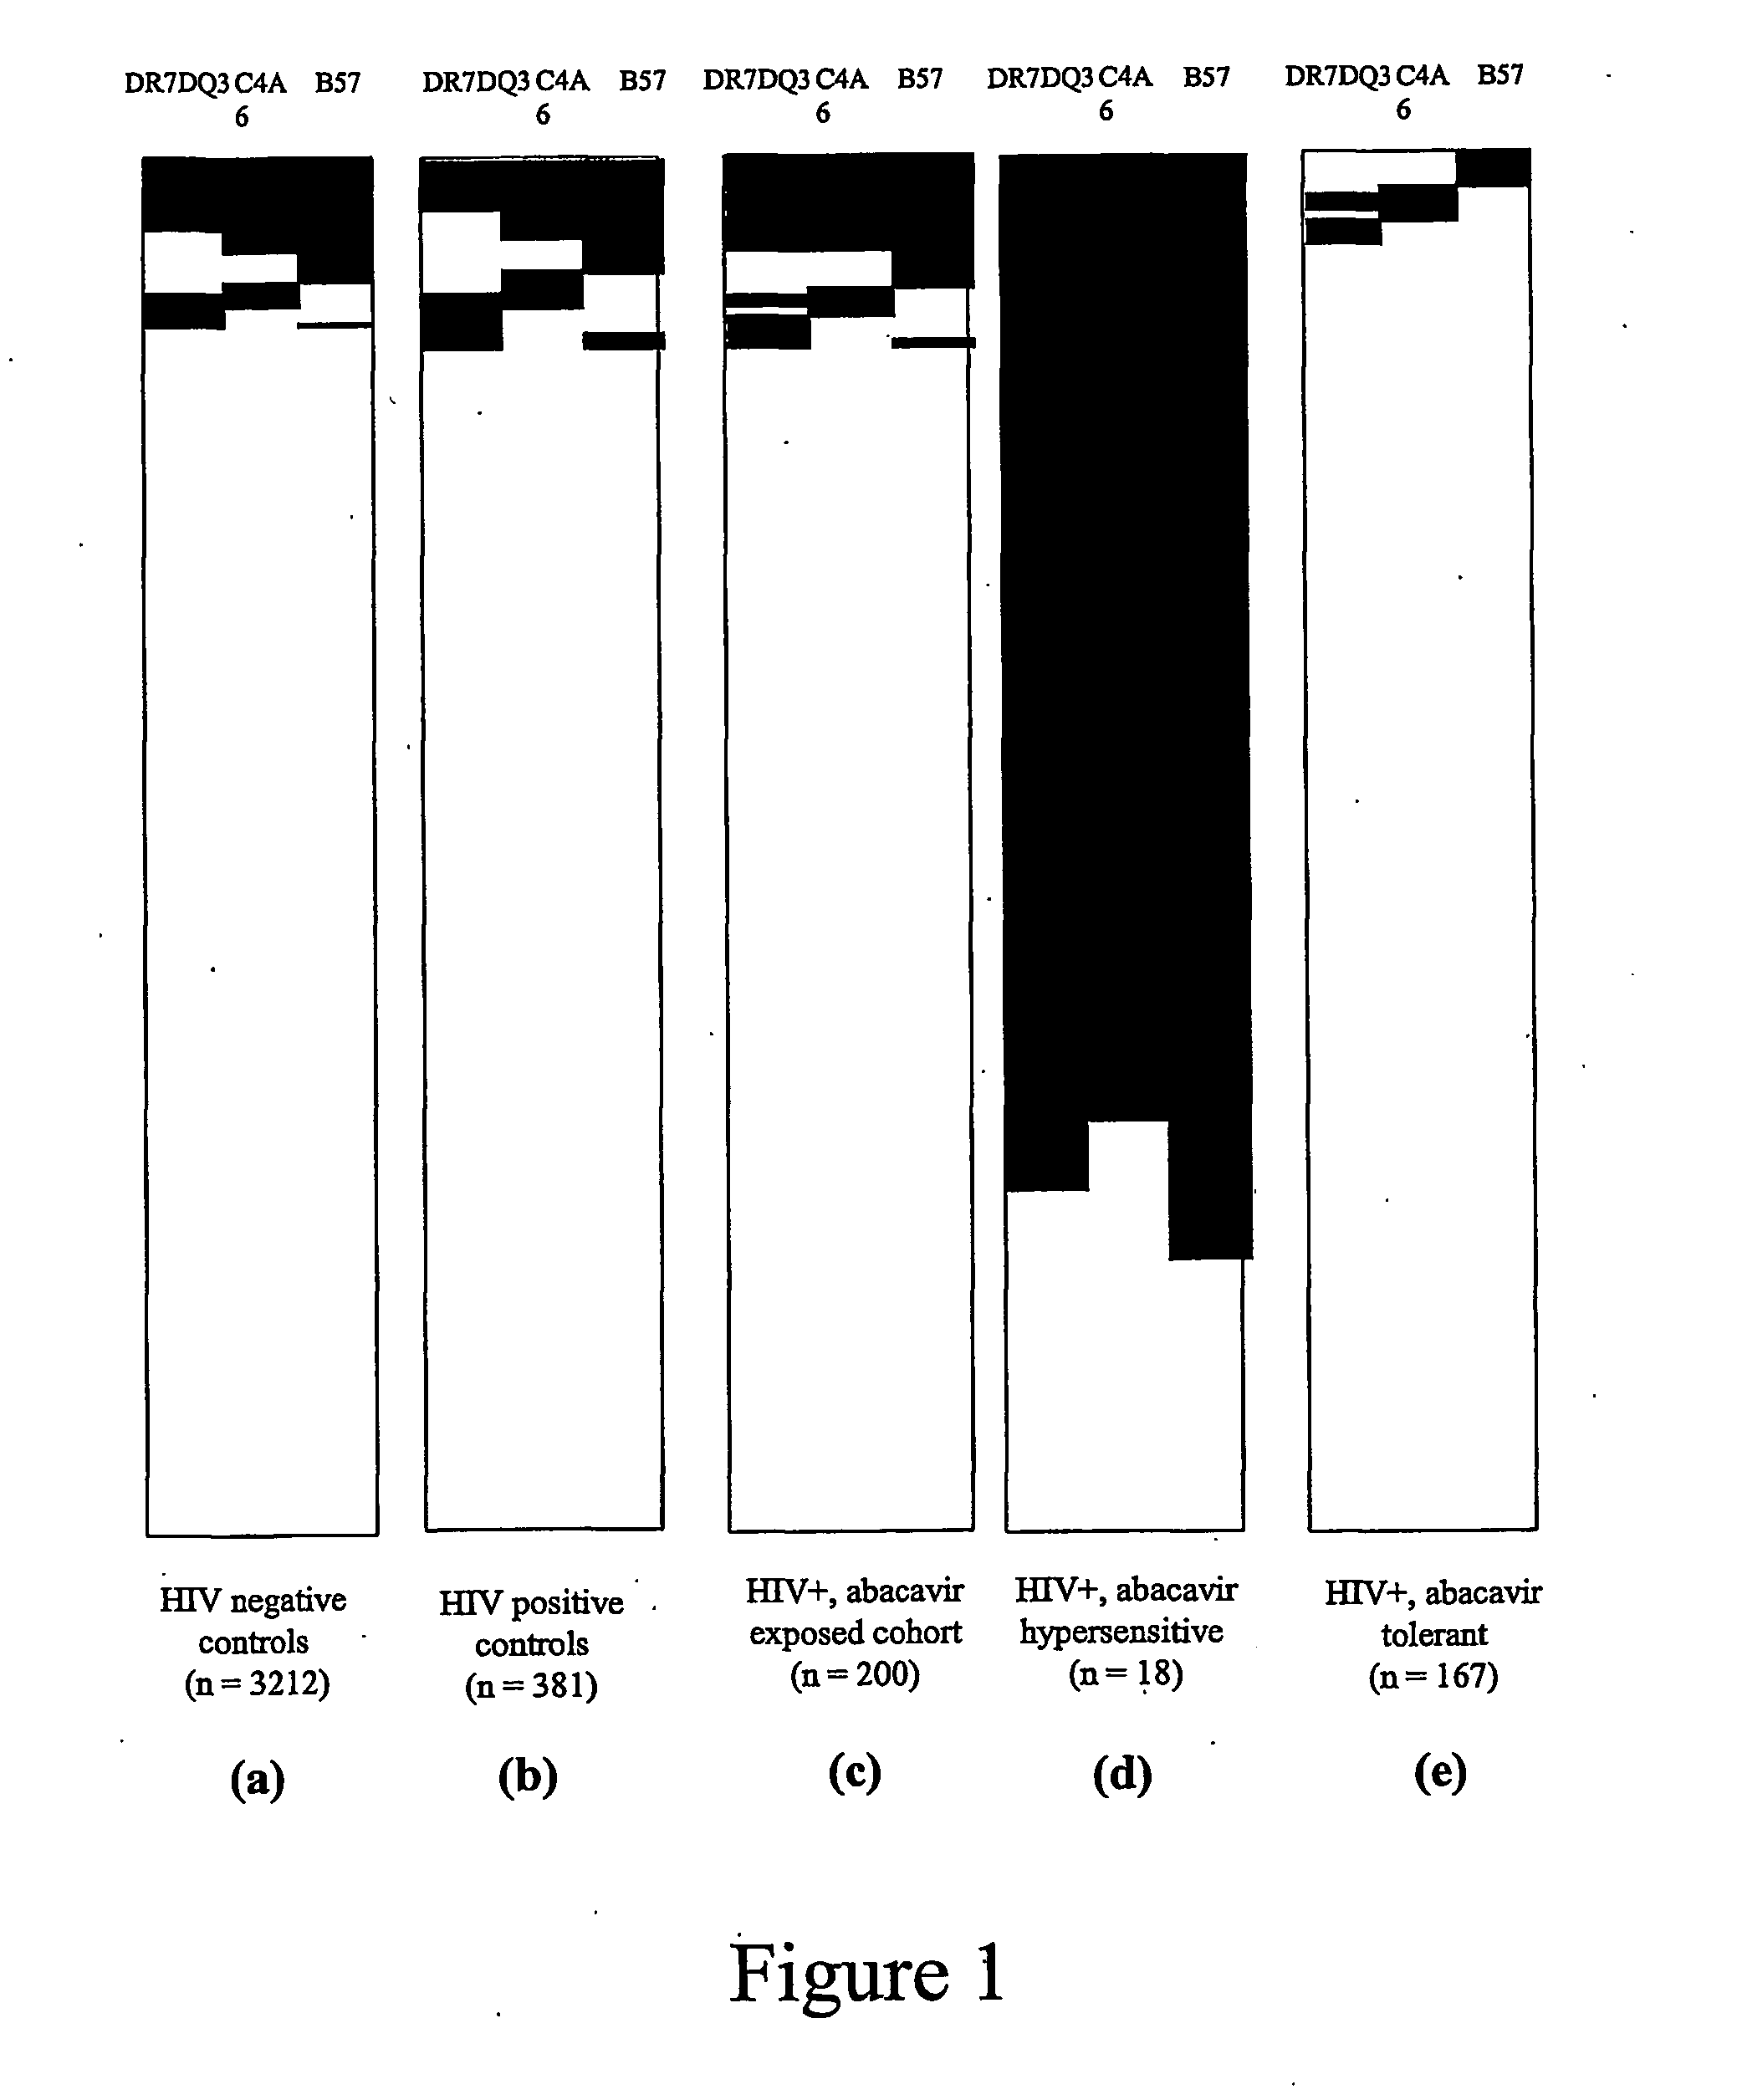 Method for identification and determination of hypersensitivity of a patient to abacavir